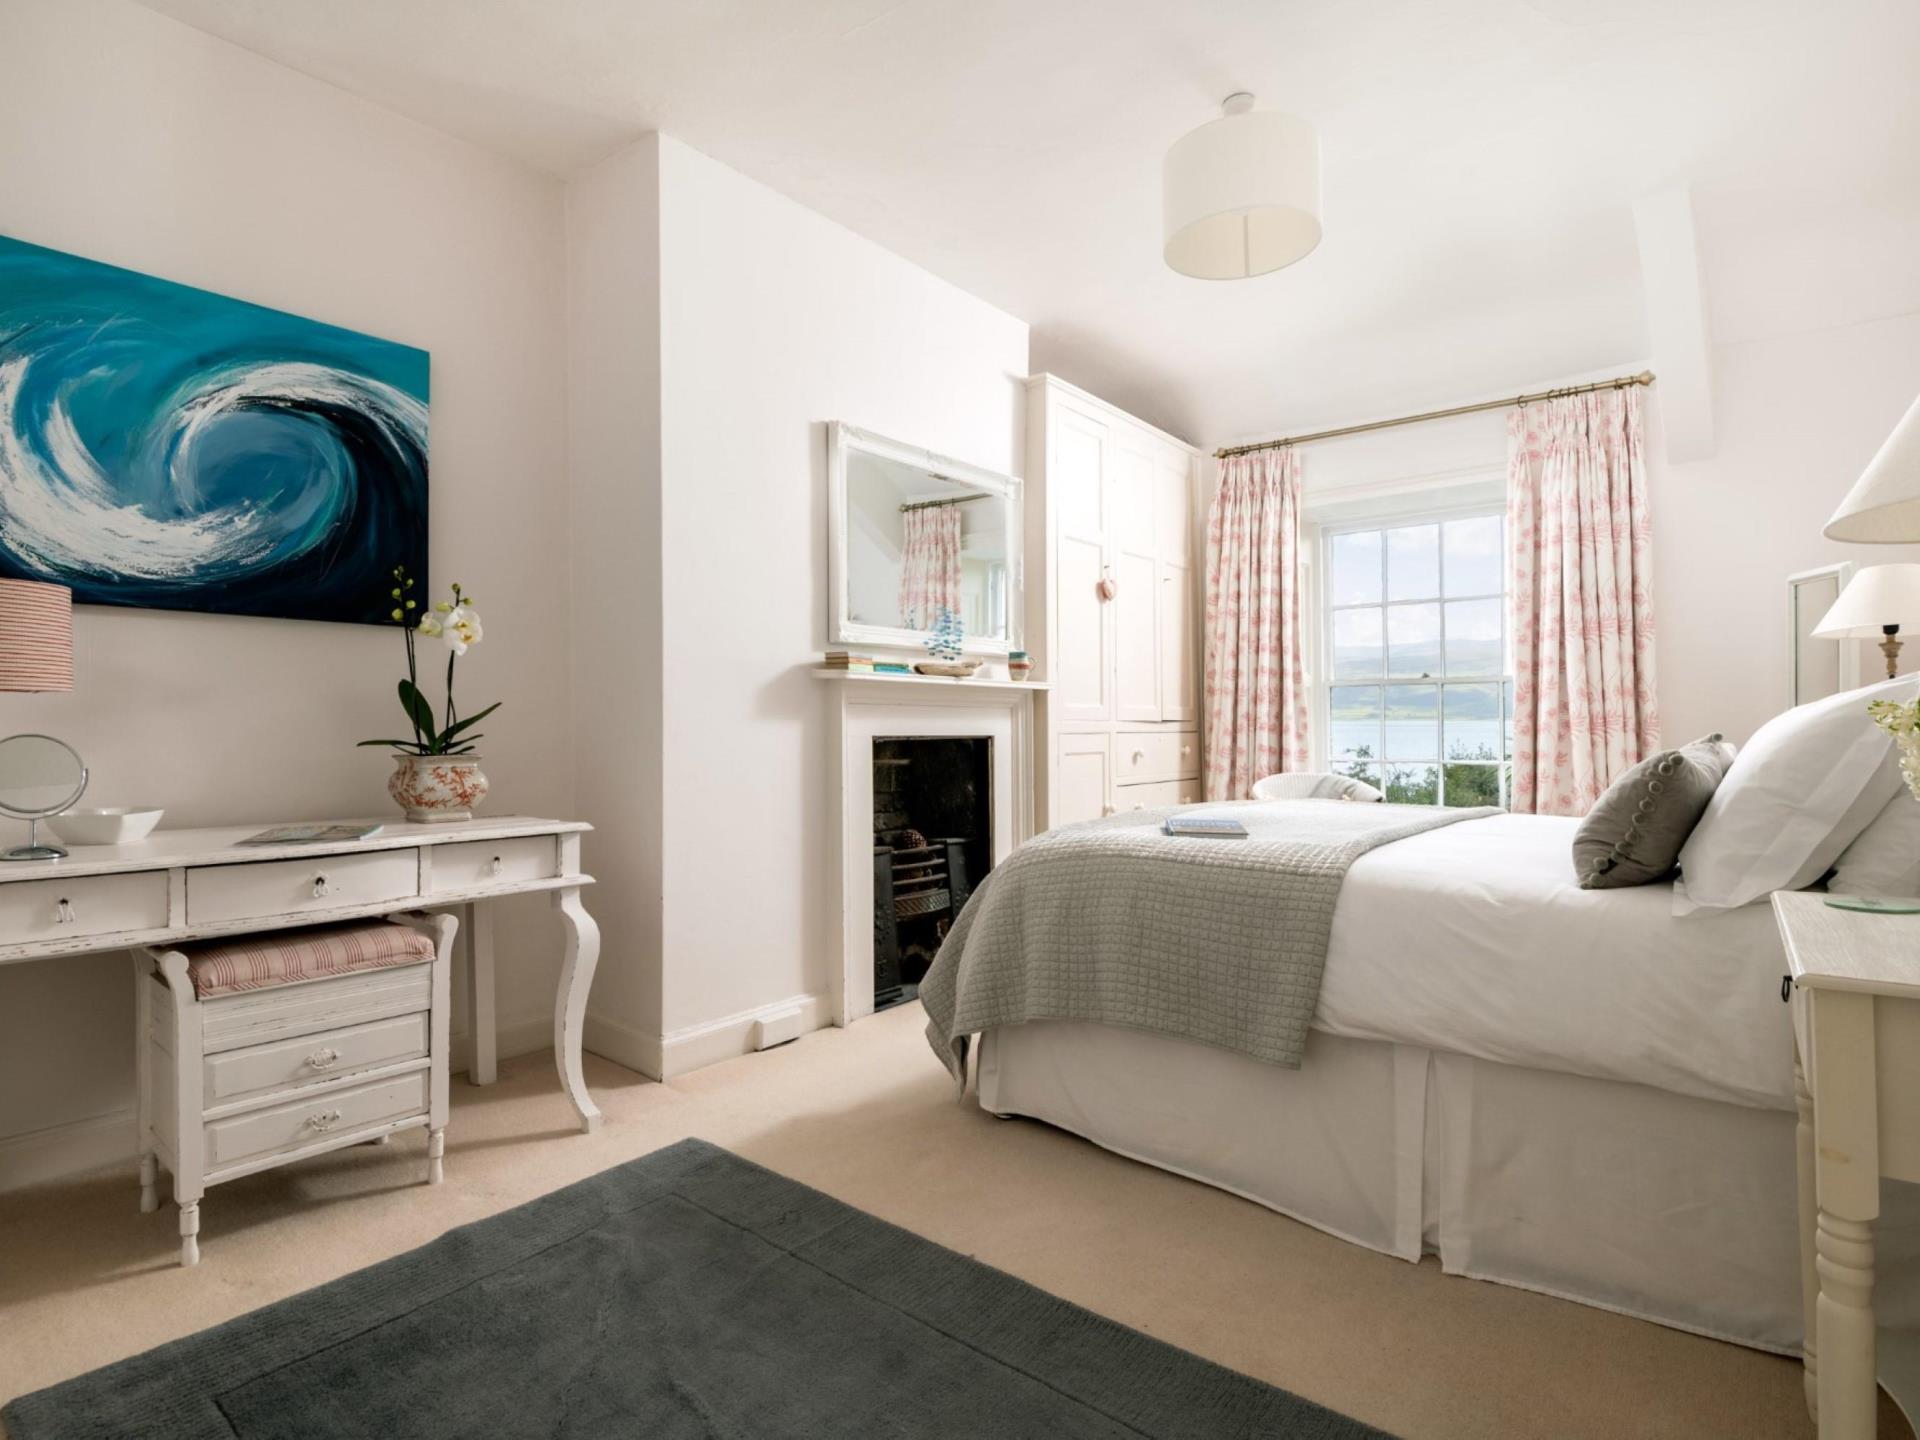 An upstairs King bedroom with sea views